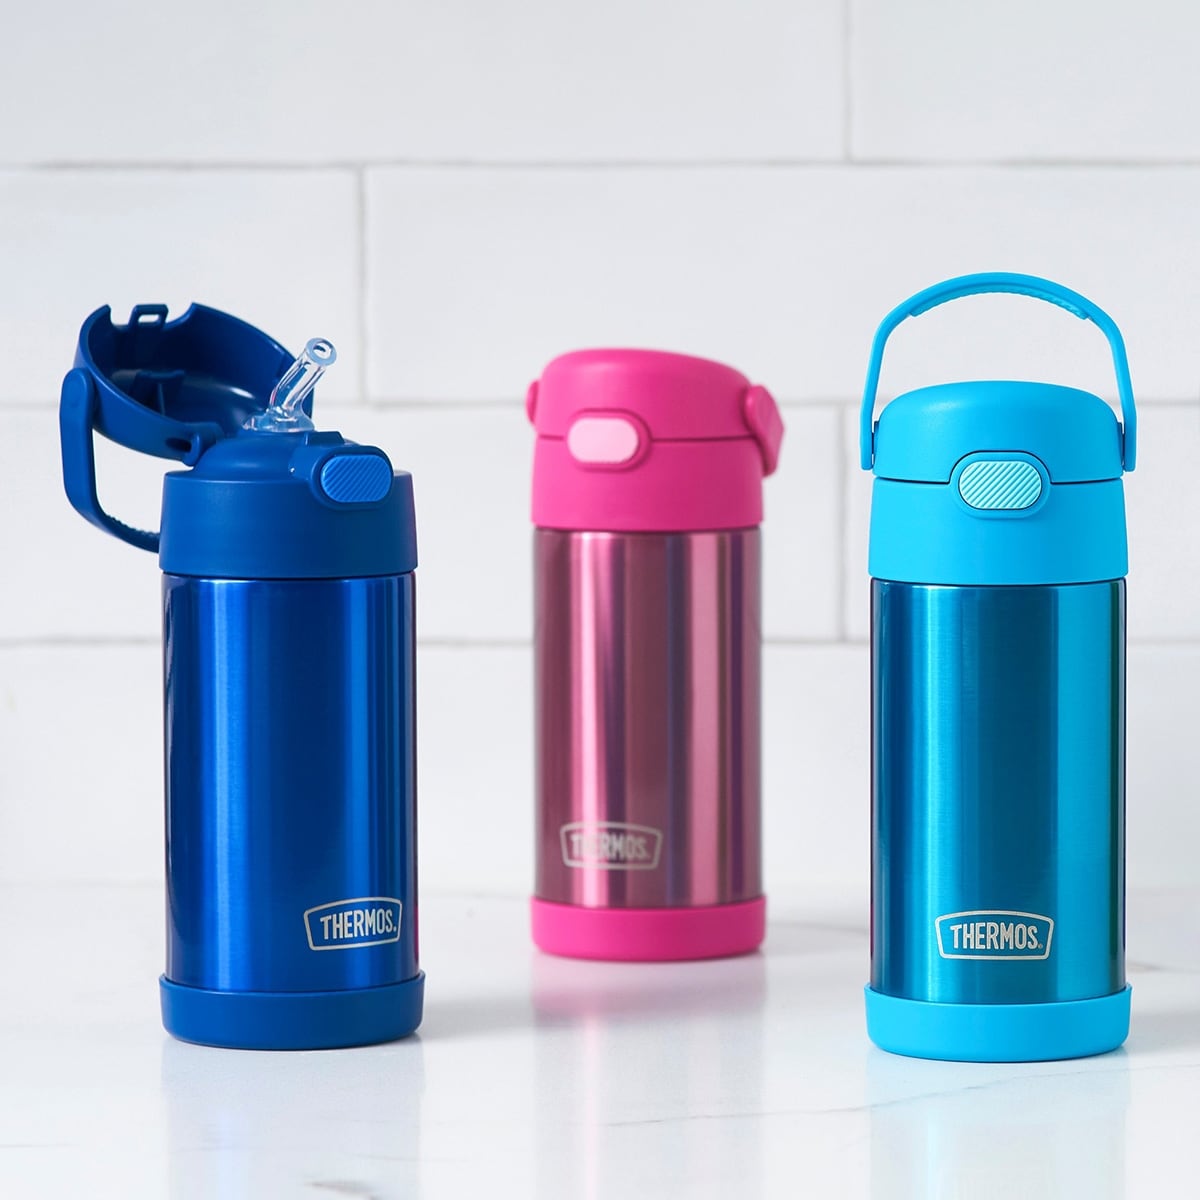 https://ak1.ostkcdn.com/images/products/is/images/direct/15b0d91d7ce5257d6b3734e50e088bb72ba7f583/Thermos-12-oz.-Kid%27s-Funtainer-Insulated-Stainless-Steel-Water-Bottle.jpg